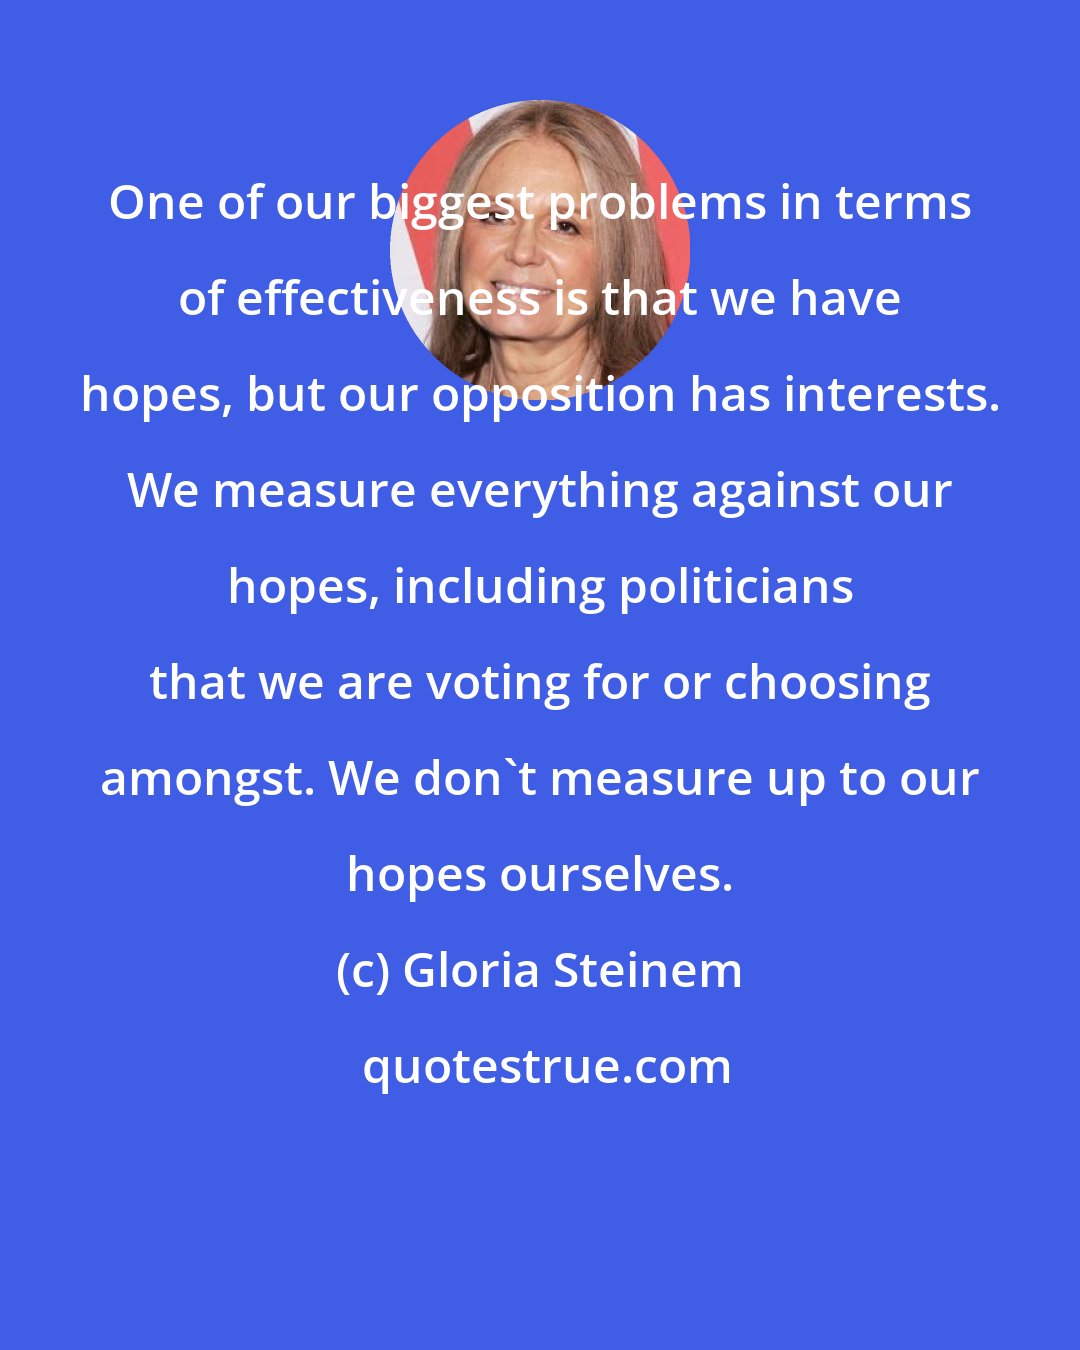 Gloria Steinem: One of our biggest problems in terms of effectiveness is that we have hopes, but our opposition has interests. We measure everything against our hopes, including politicians that we are voting for or choosing amongst. We don't measure up to our hopes ourselves.